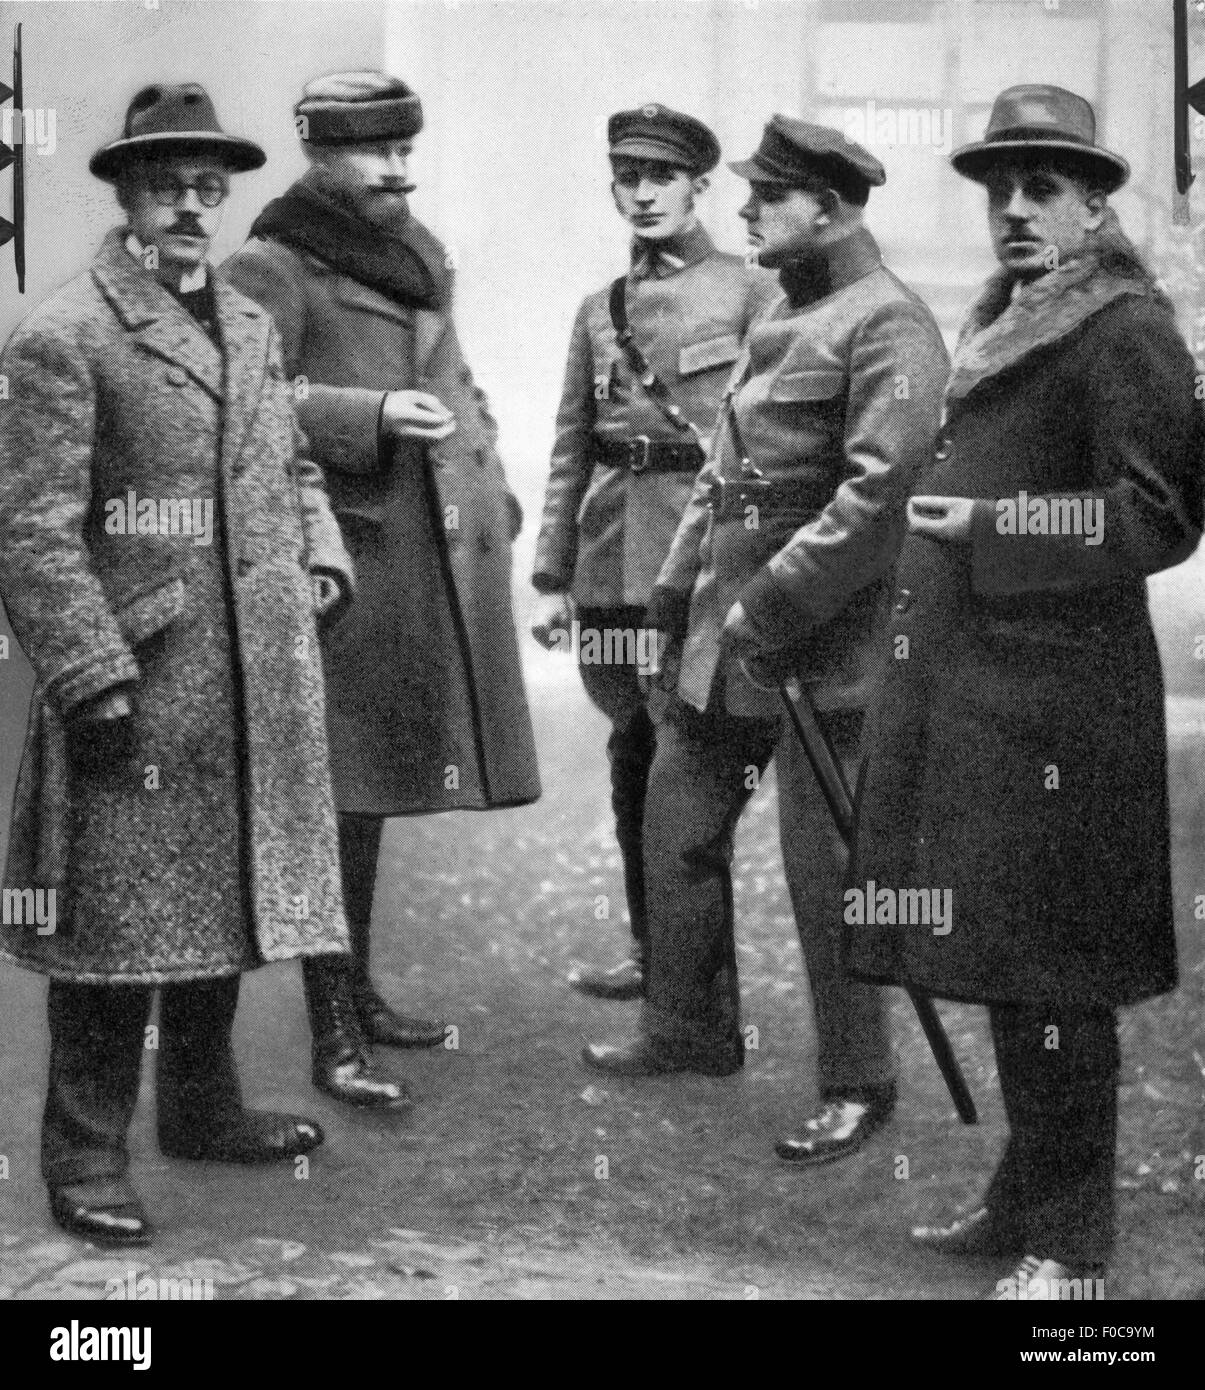 Heinz, Franz Josef, 25.2.1884 - 9.1.1924, German agriculturist and politician, head of government of the Autonomous Palatinate 11.11.1923 - 9.1.1924, full length (2nd from left), with his cabinet Schmitz-Epper, Flicker, Bauer and Wilhelm, Speyer, November 1923, Stock Photo